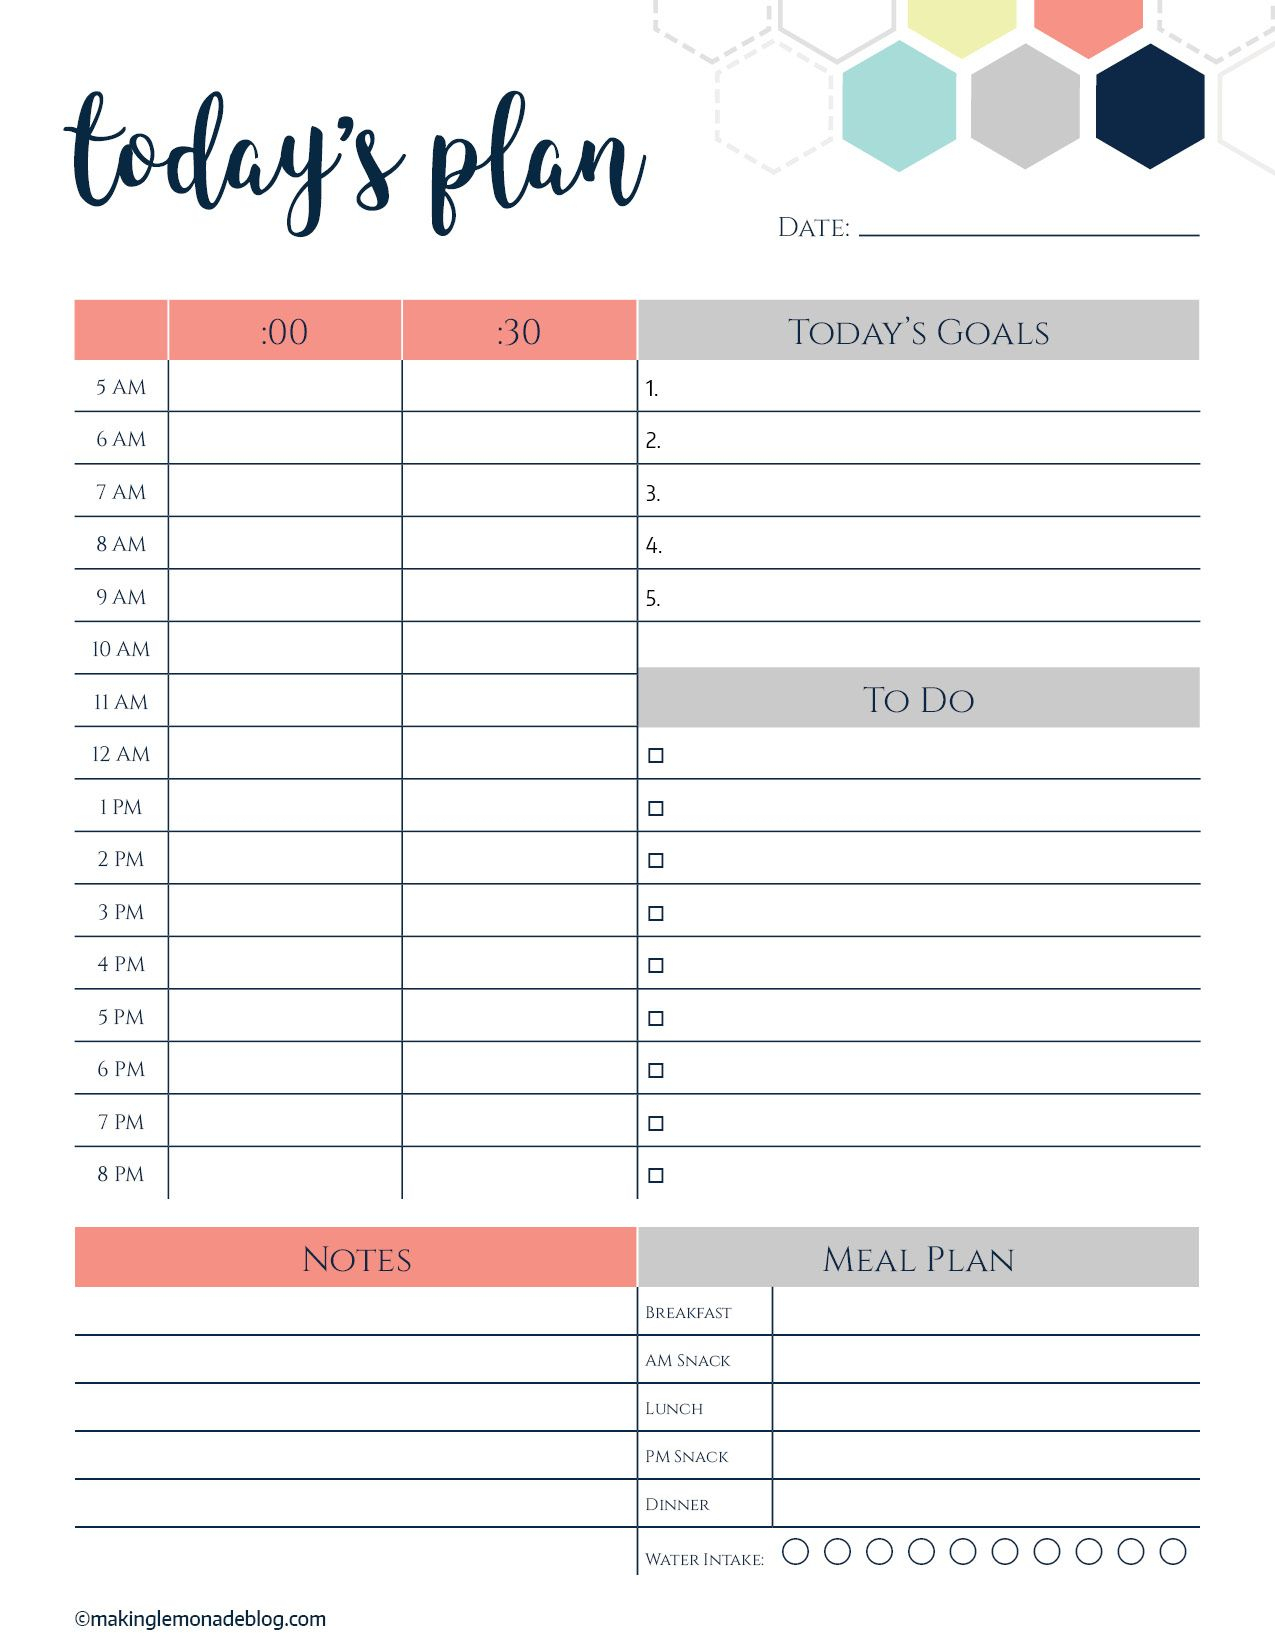 This Free Printable Daily Planner Changes Everything. Finally A Way - Free Printable Daily Planner